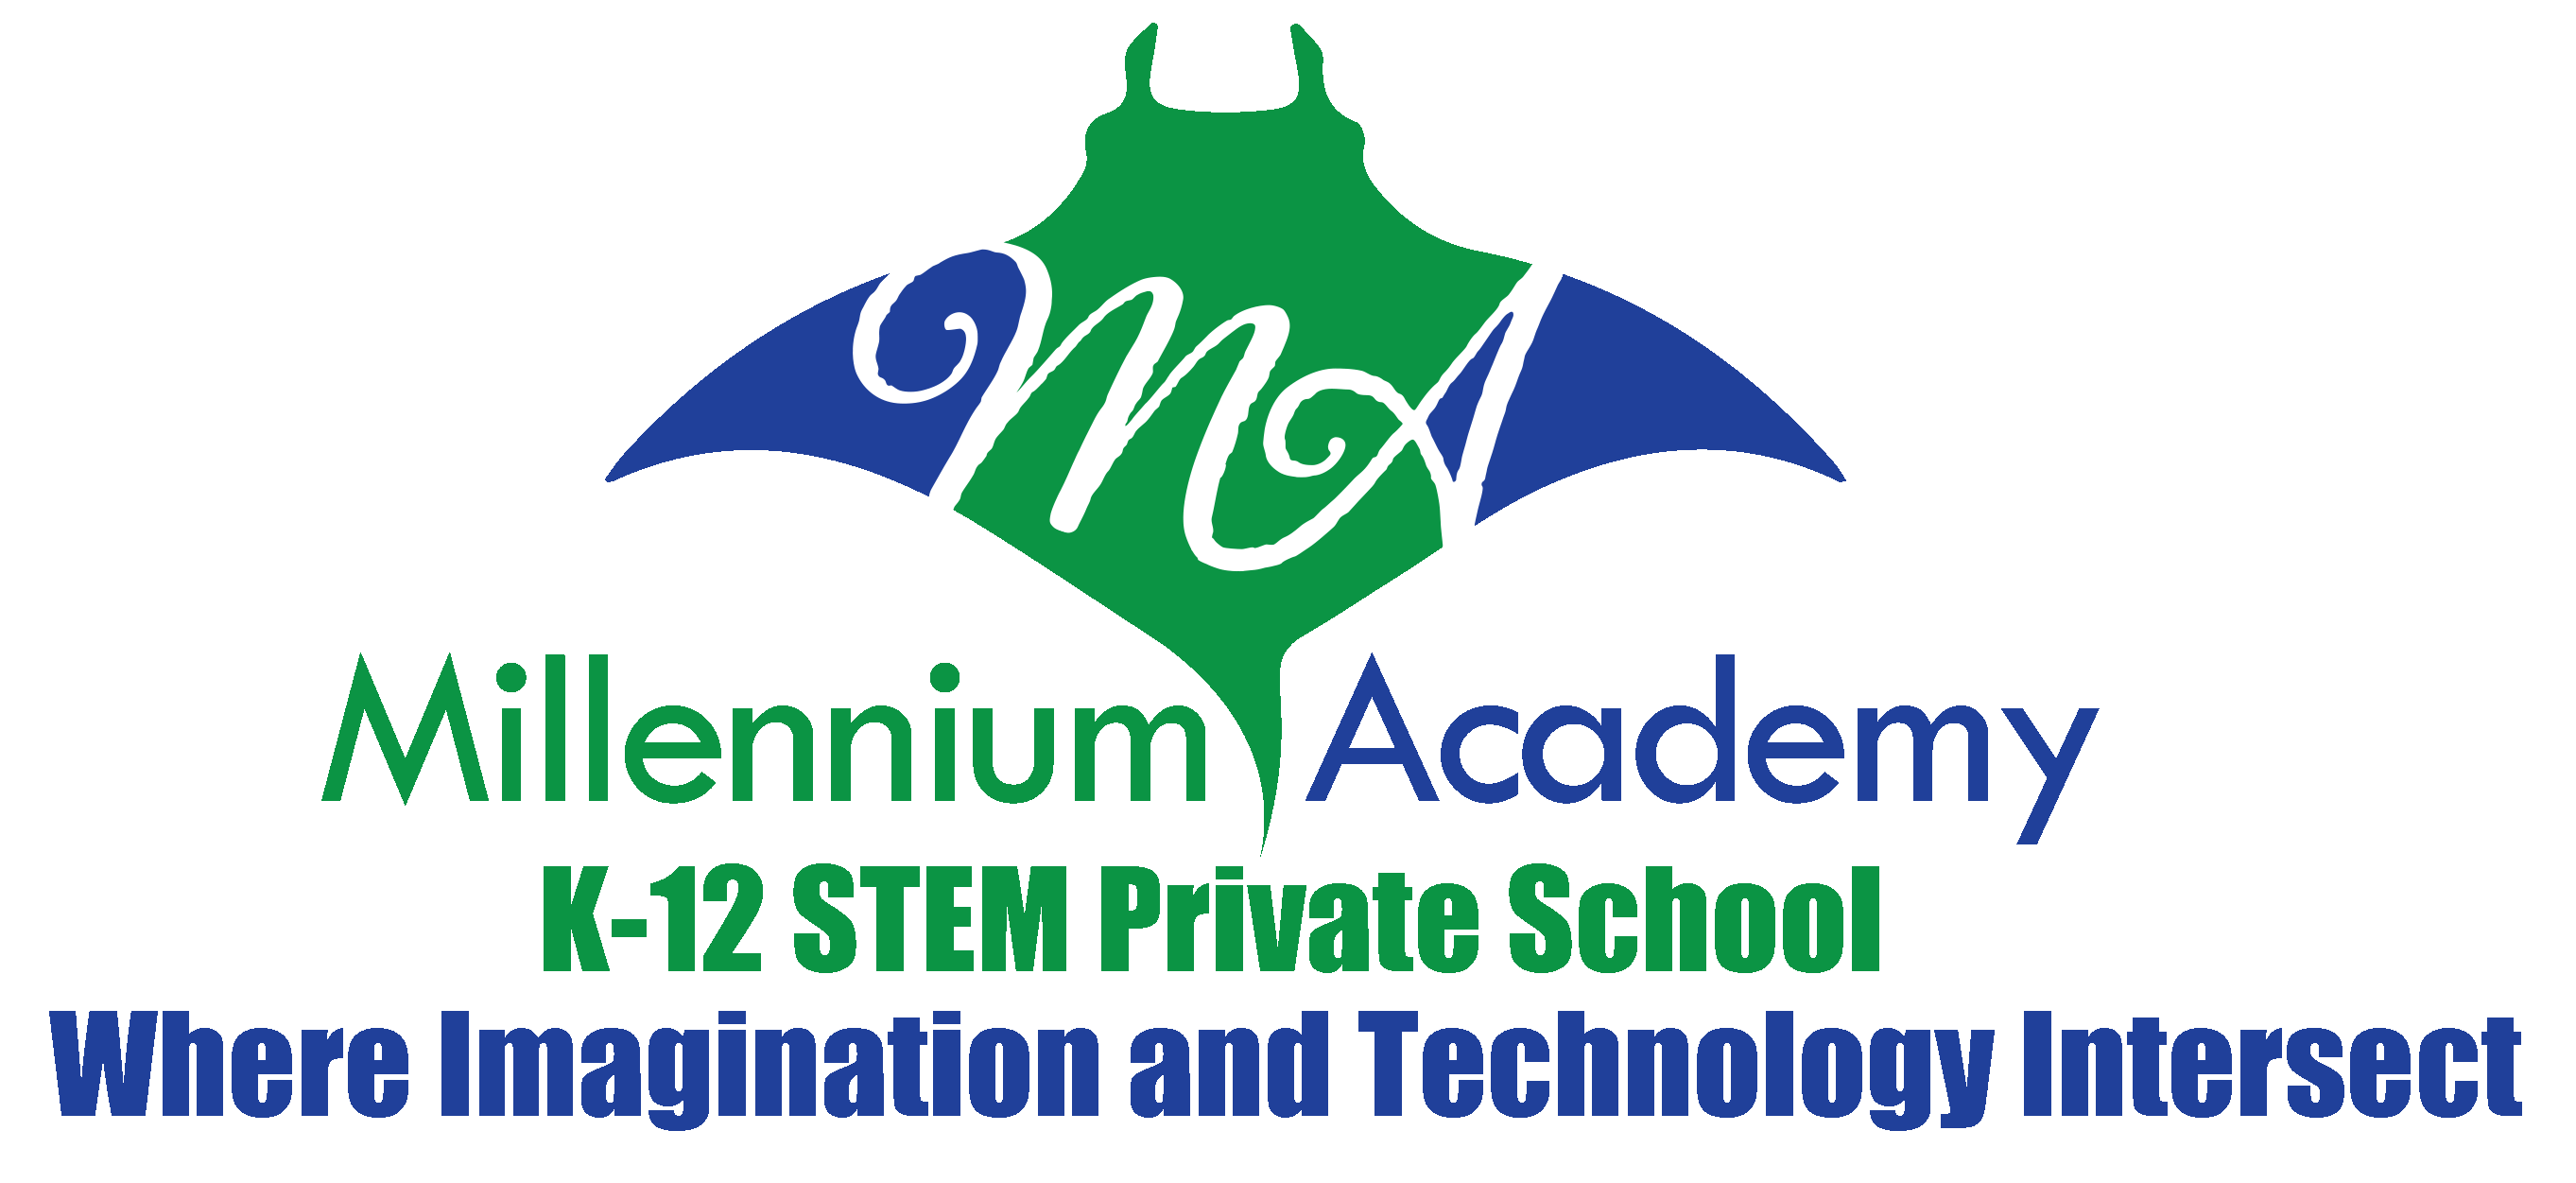 Millennium Academy Private, Independent, International School k-12 located in Pasco County